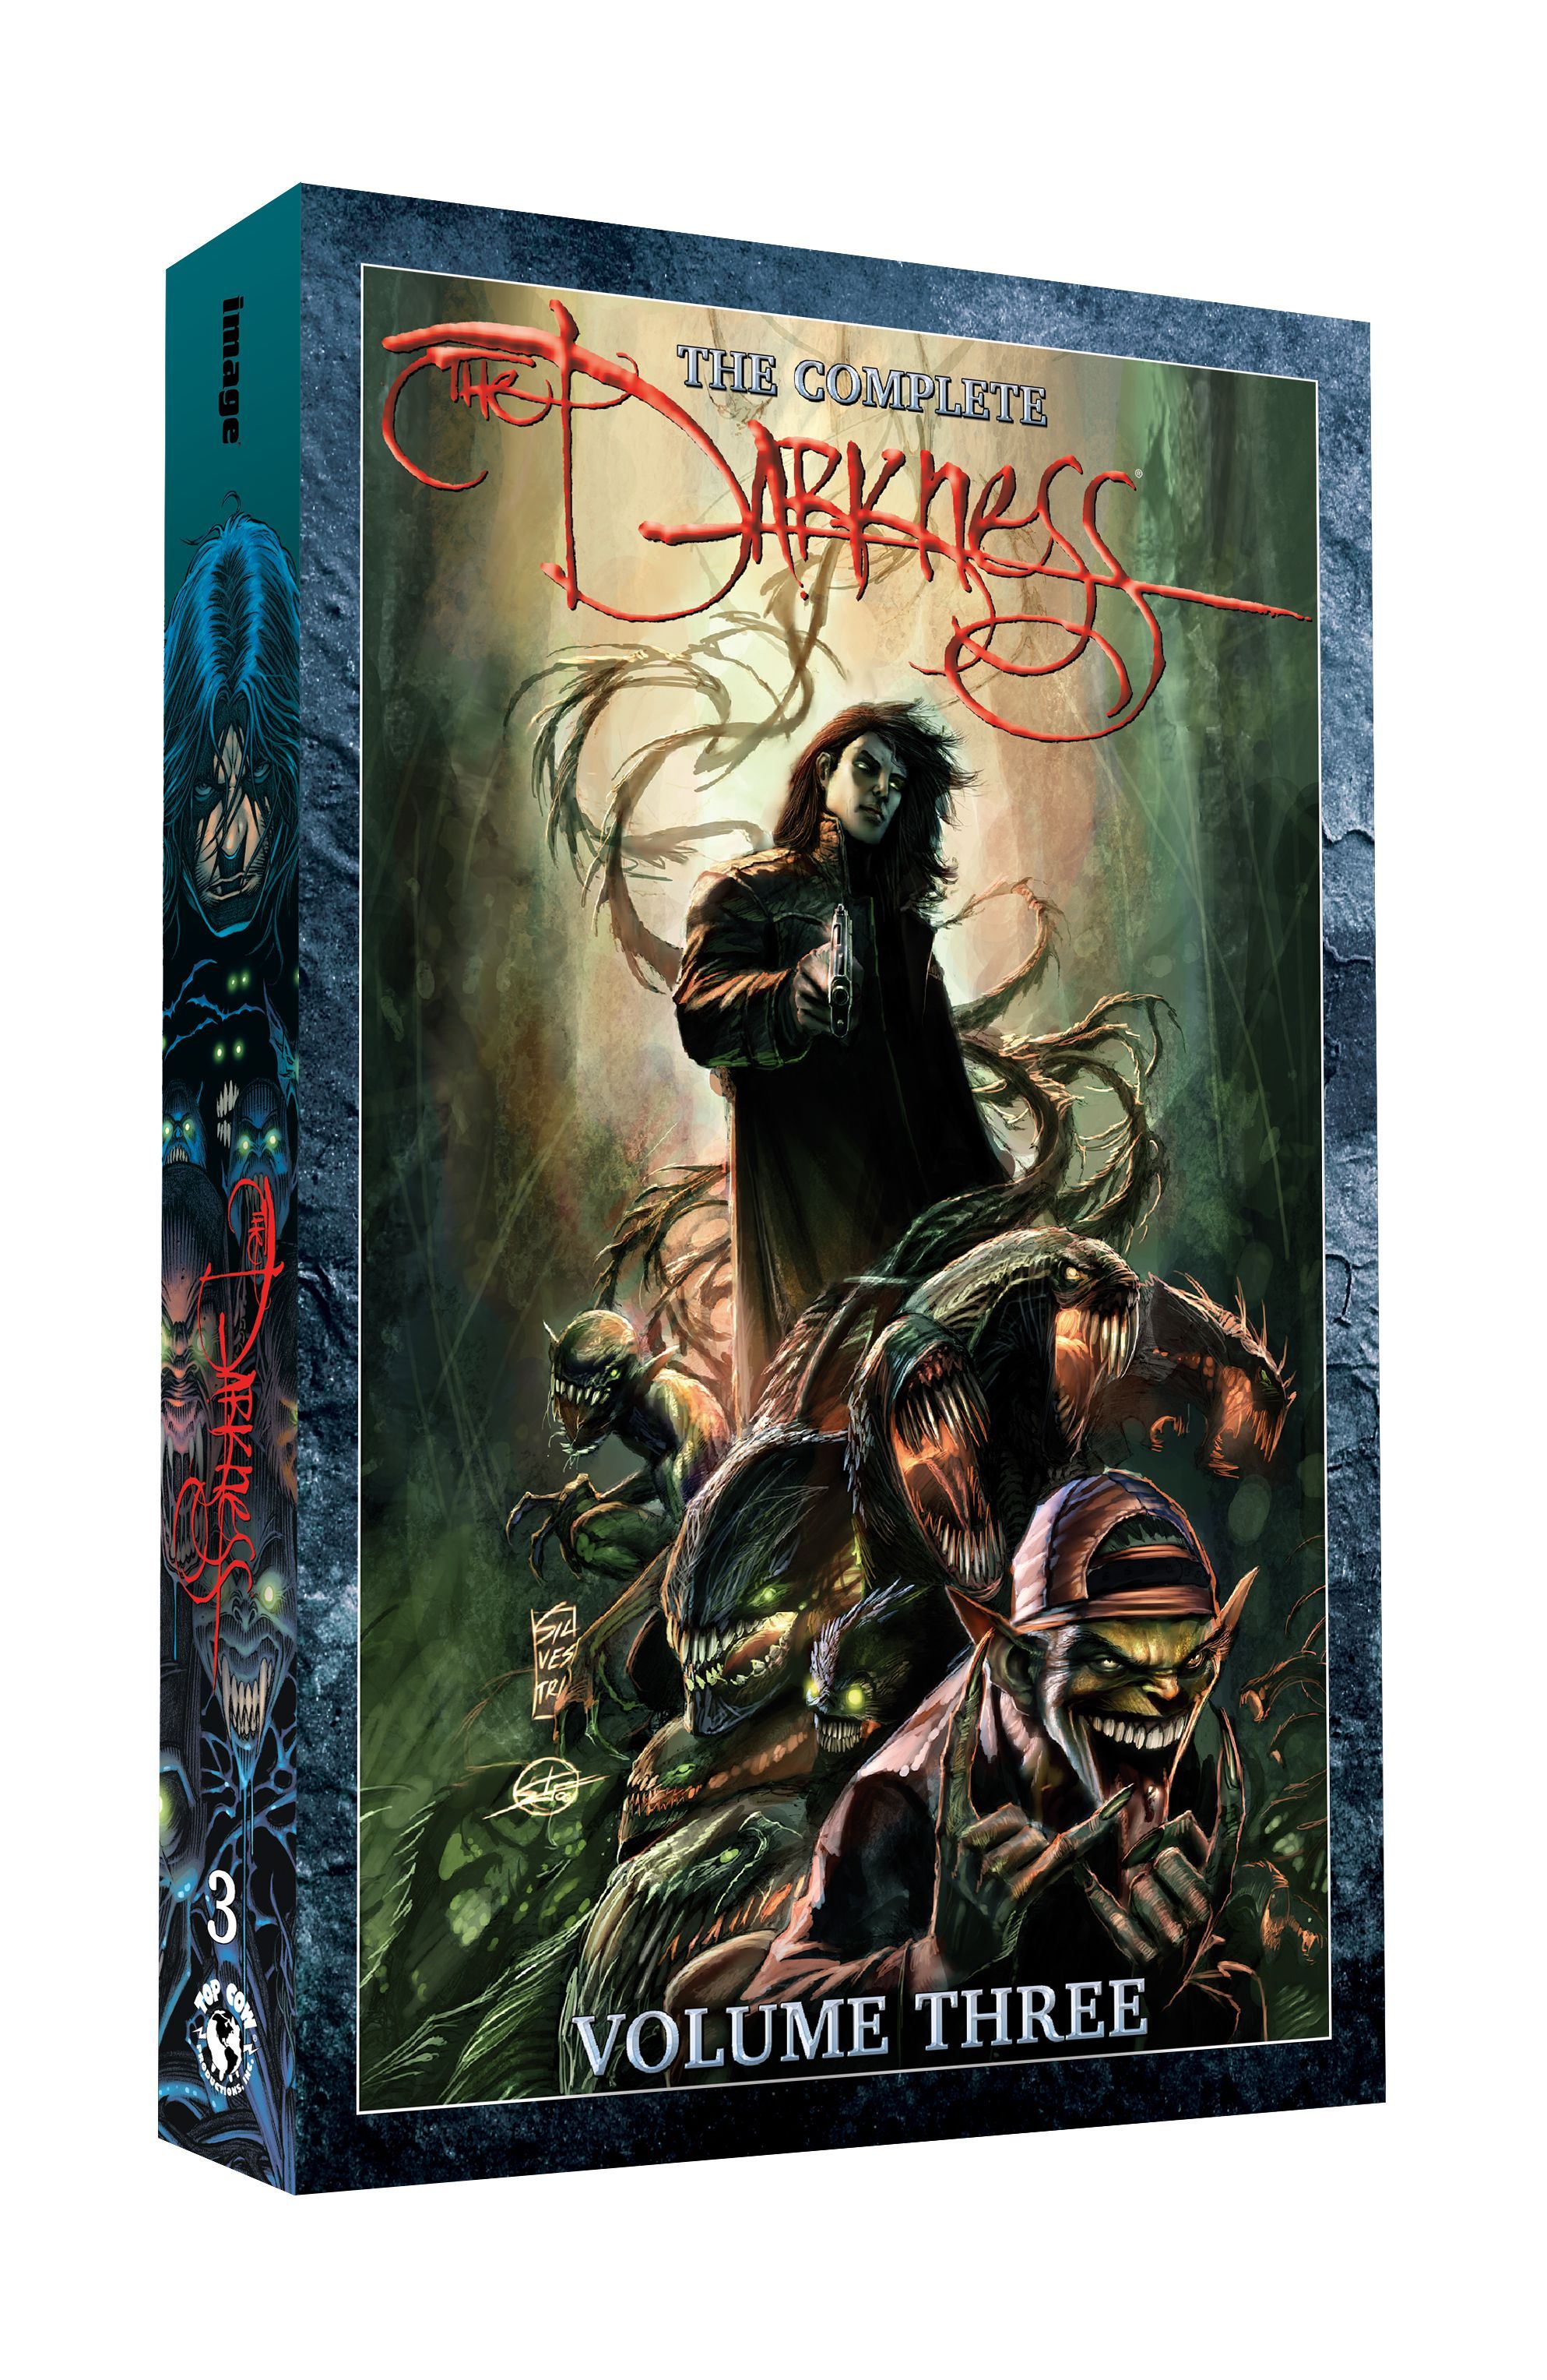 Darkness Complete Collection Volume 3 Cover: a man in dark clothes poses among monsters.